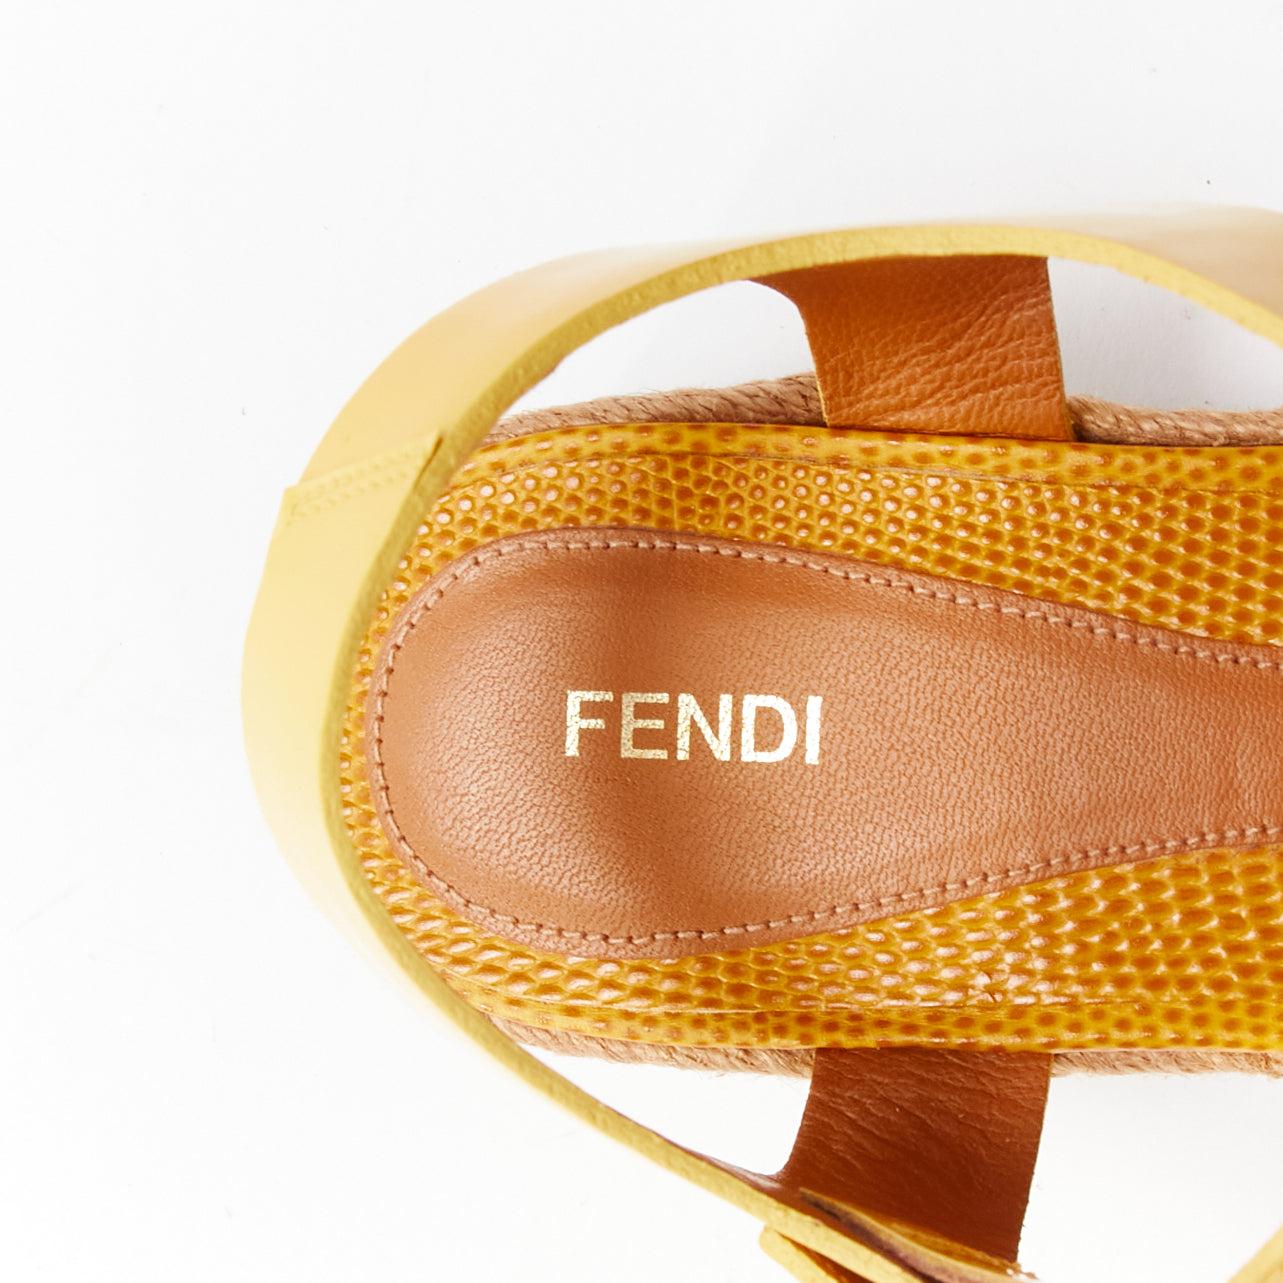 FENDI yellow embossed leather cross strap patent ankle strap jute sandal EU36.5 For Sale 5